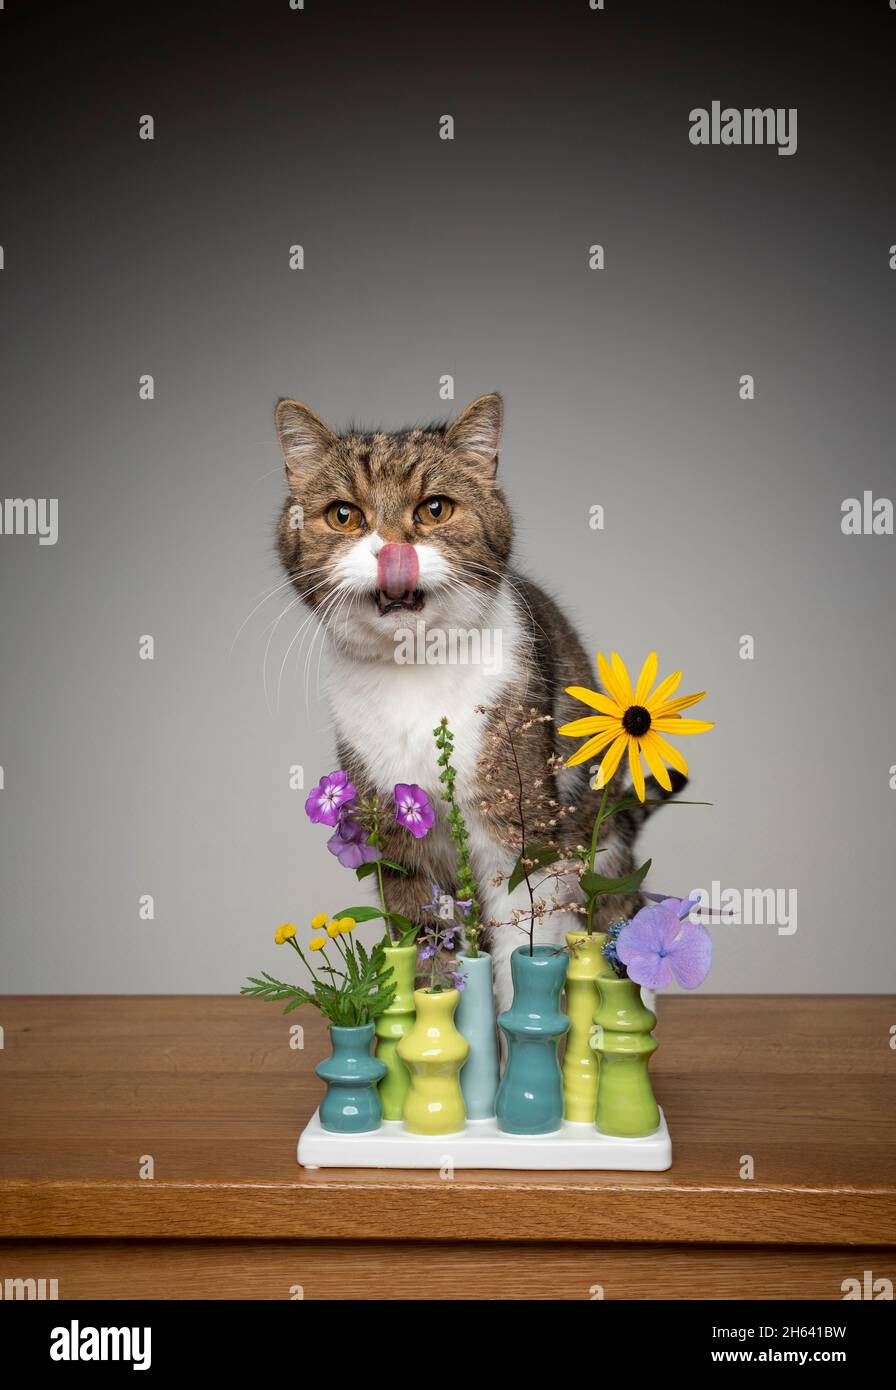 cute tabby white british shorthair cat sitting behind flower vase with different potentially toxic plants licking lips Stock Photo